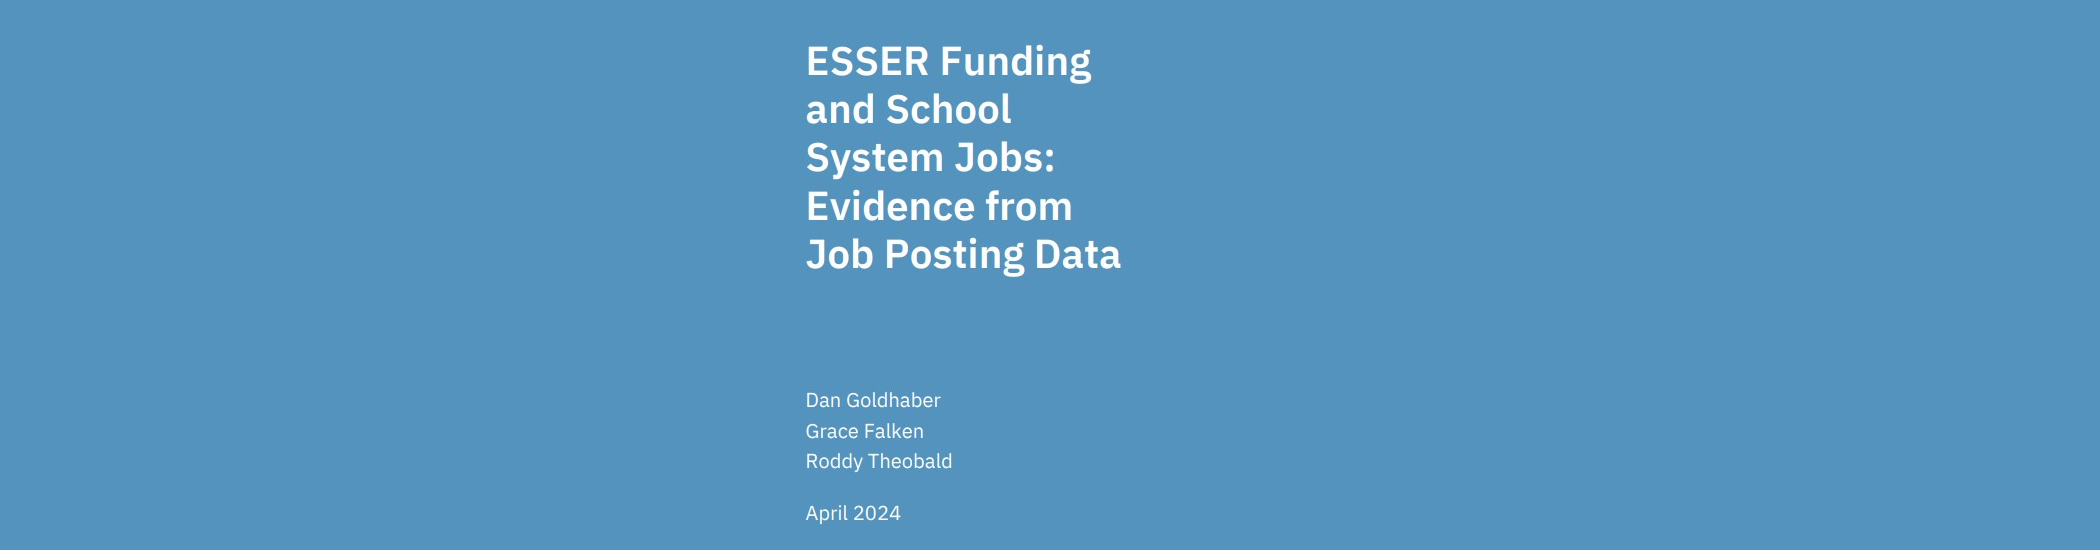 ESSER Funding and School System Jobs: Evidence from Job Posting Data